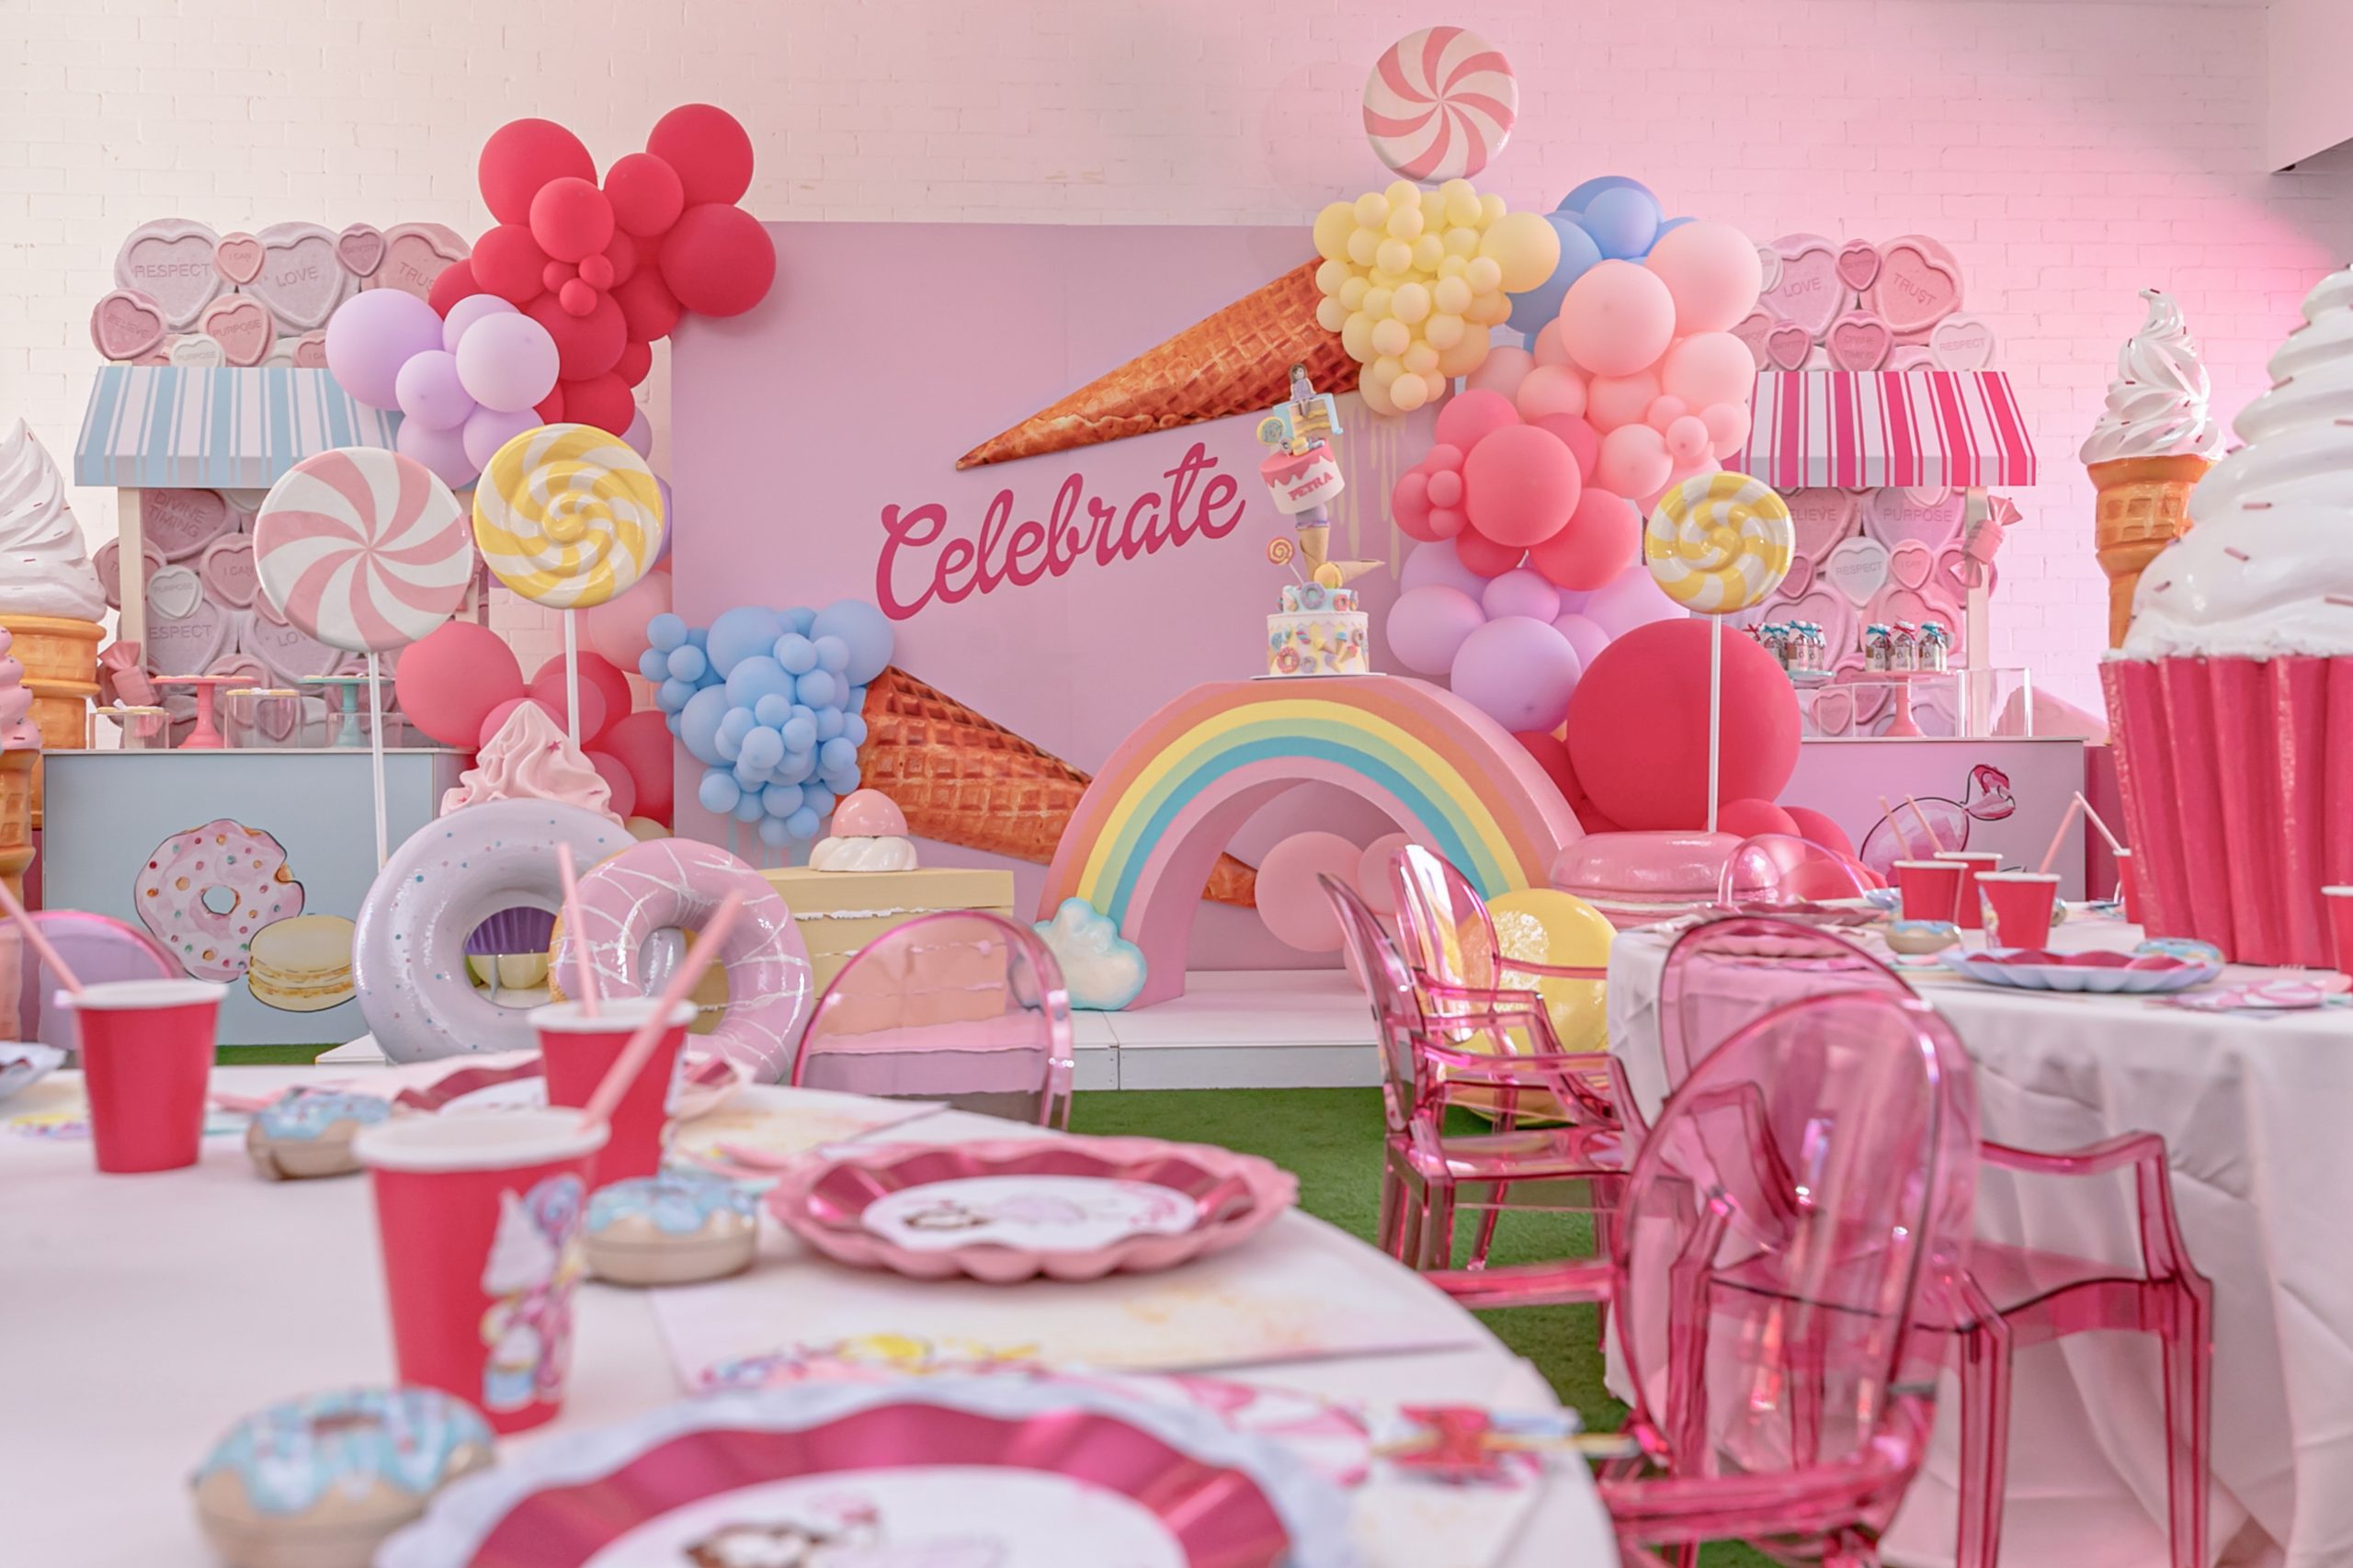 Candyland party ideas and partyware - Lifes Little Celebration